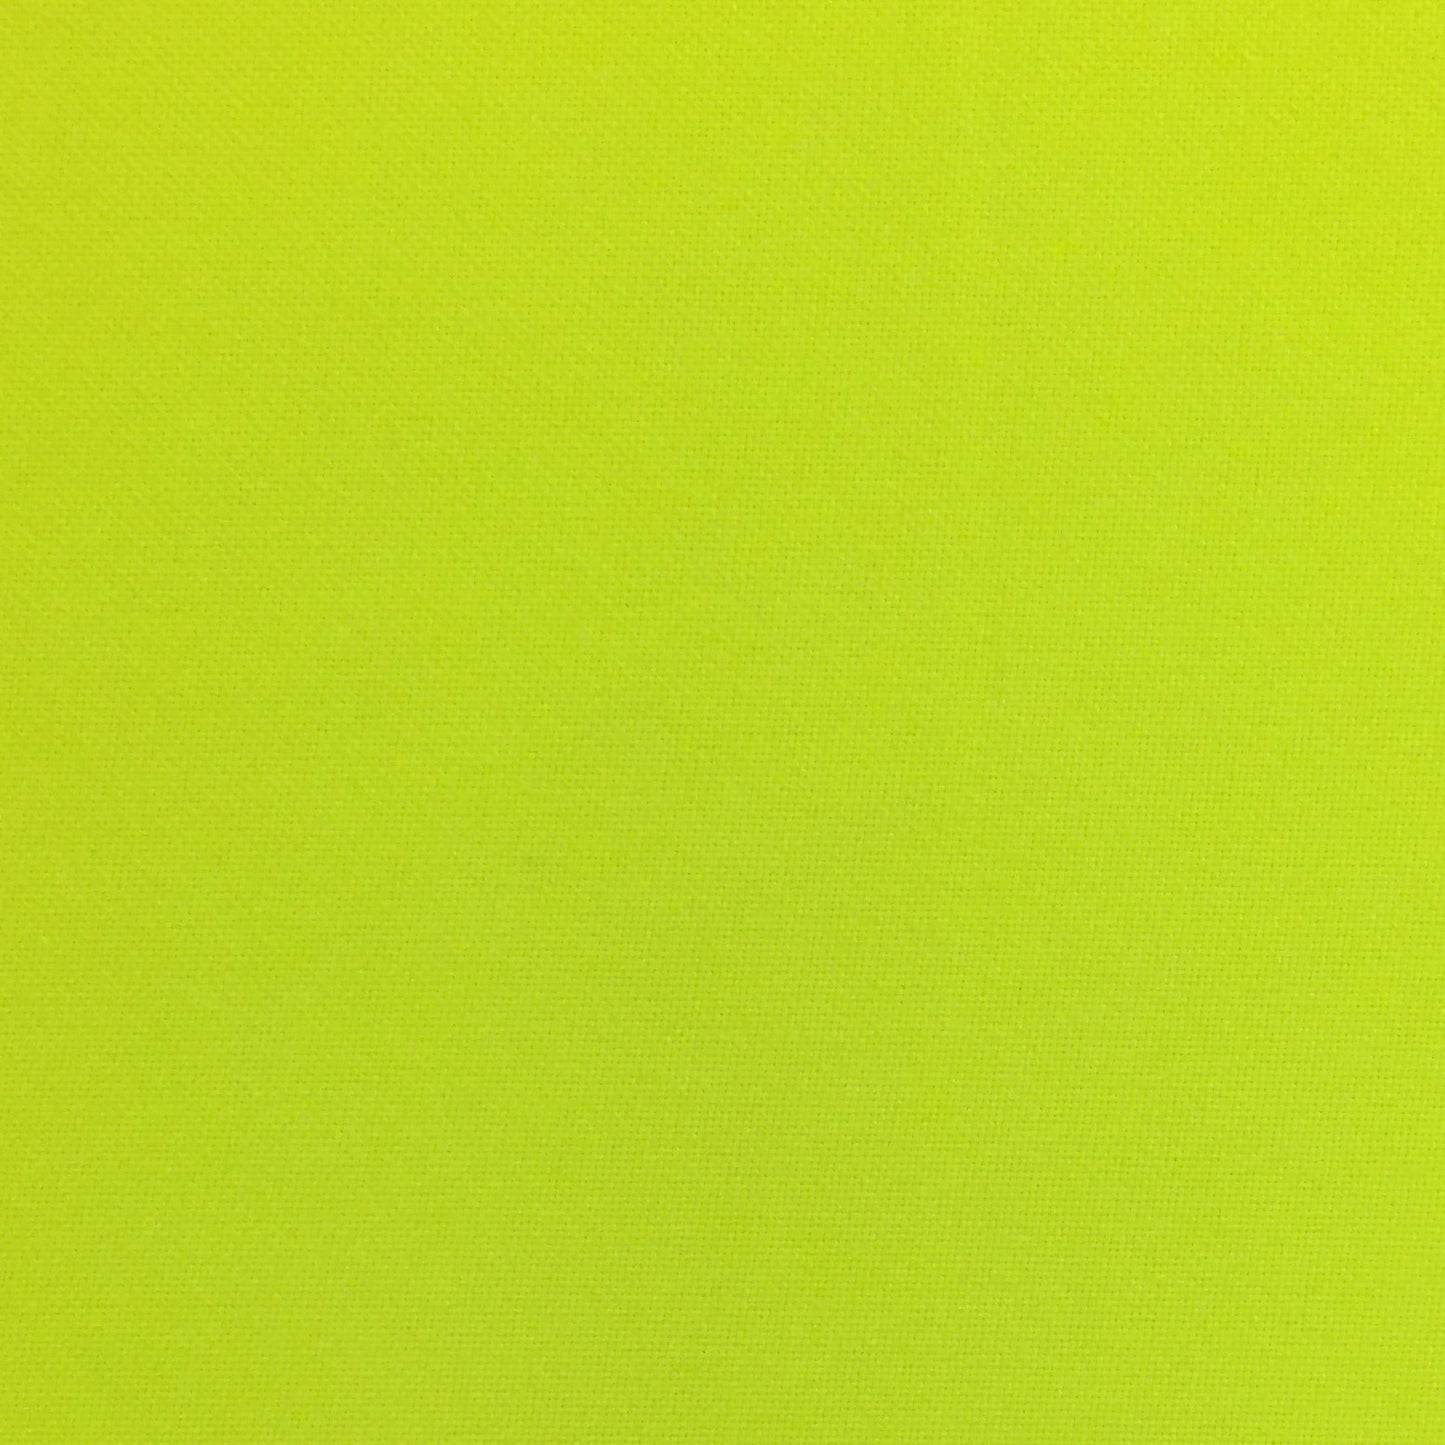 300 Denier Water-repellent Polyester - Safety Yellow (Sold per Yard)